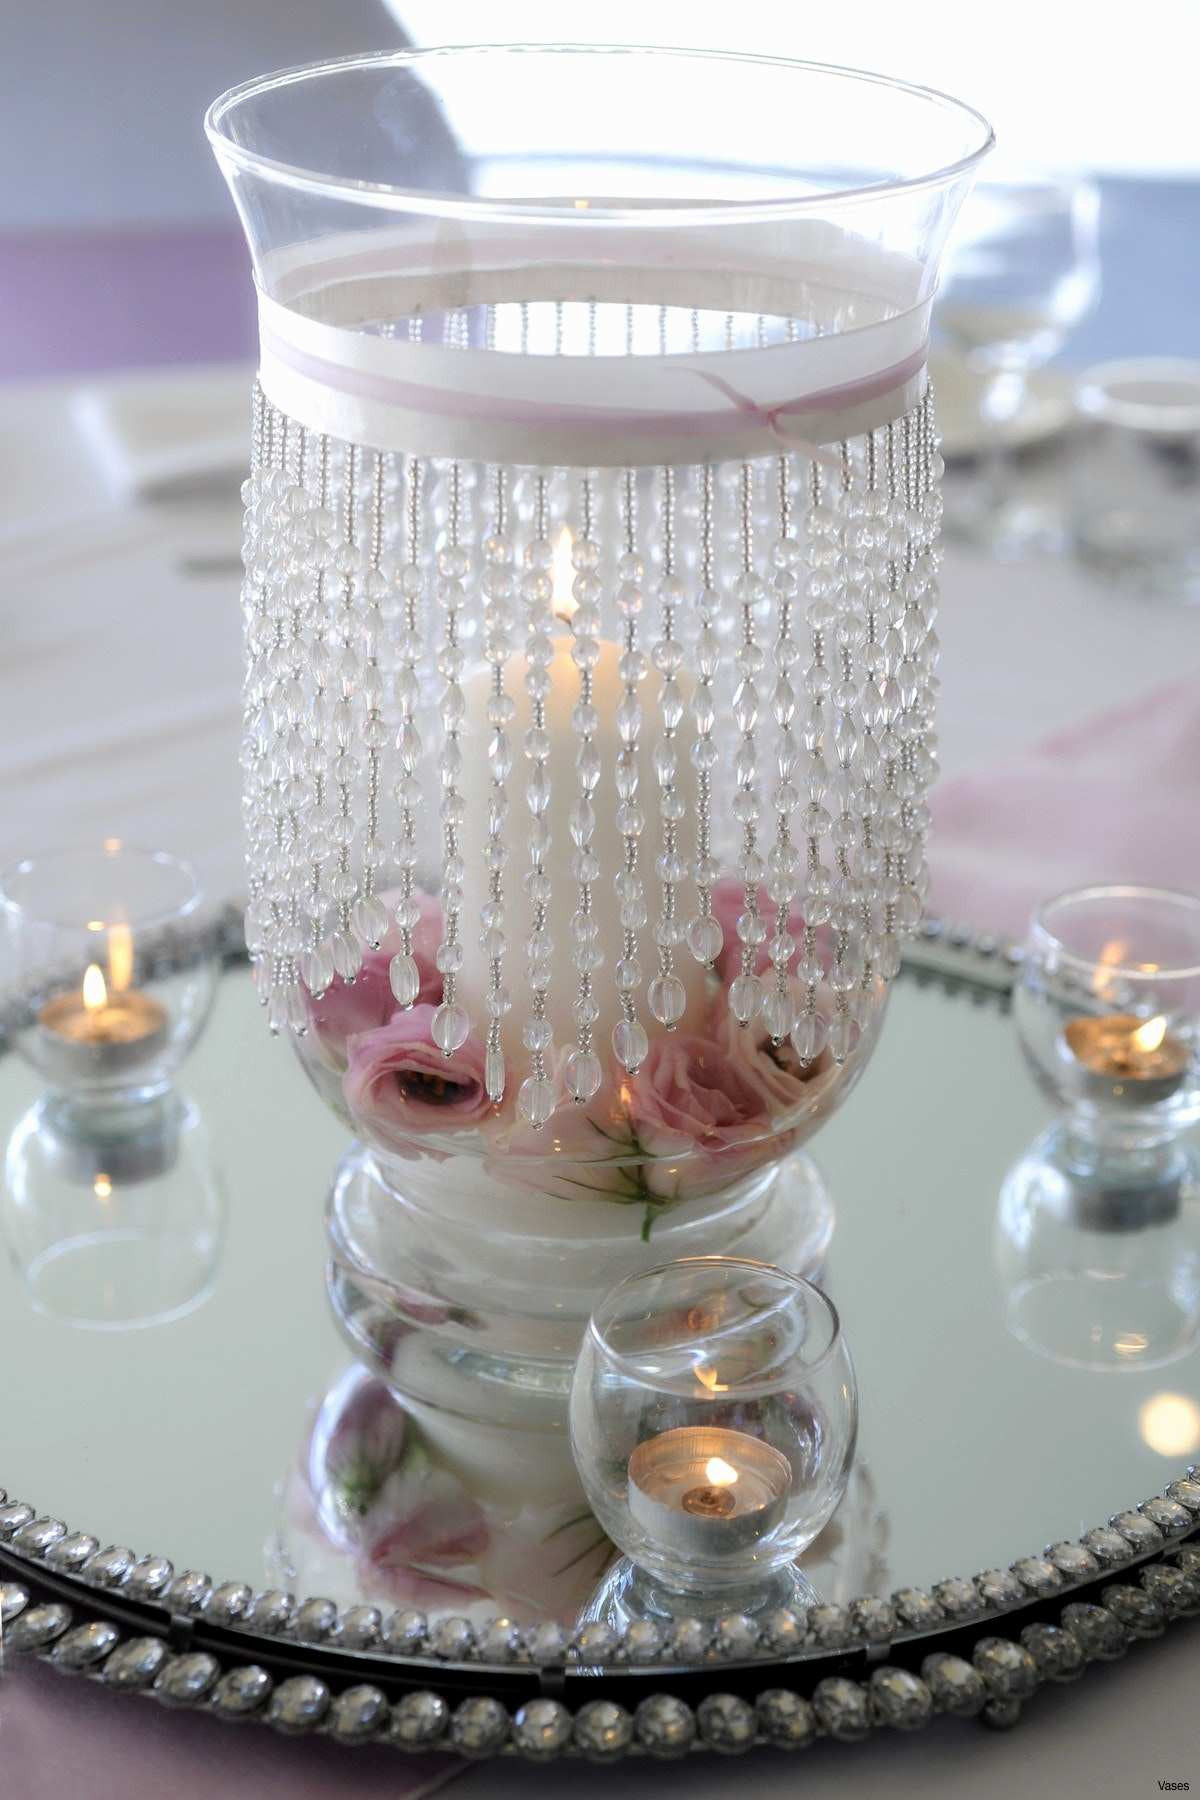 floating candle vases bulk of 26 luxury wedding centerpieces ideas sokitchenlv pertaining to centerpieces weddings awesome wedding centerpieces vases glassh for centerpieces